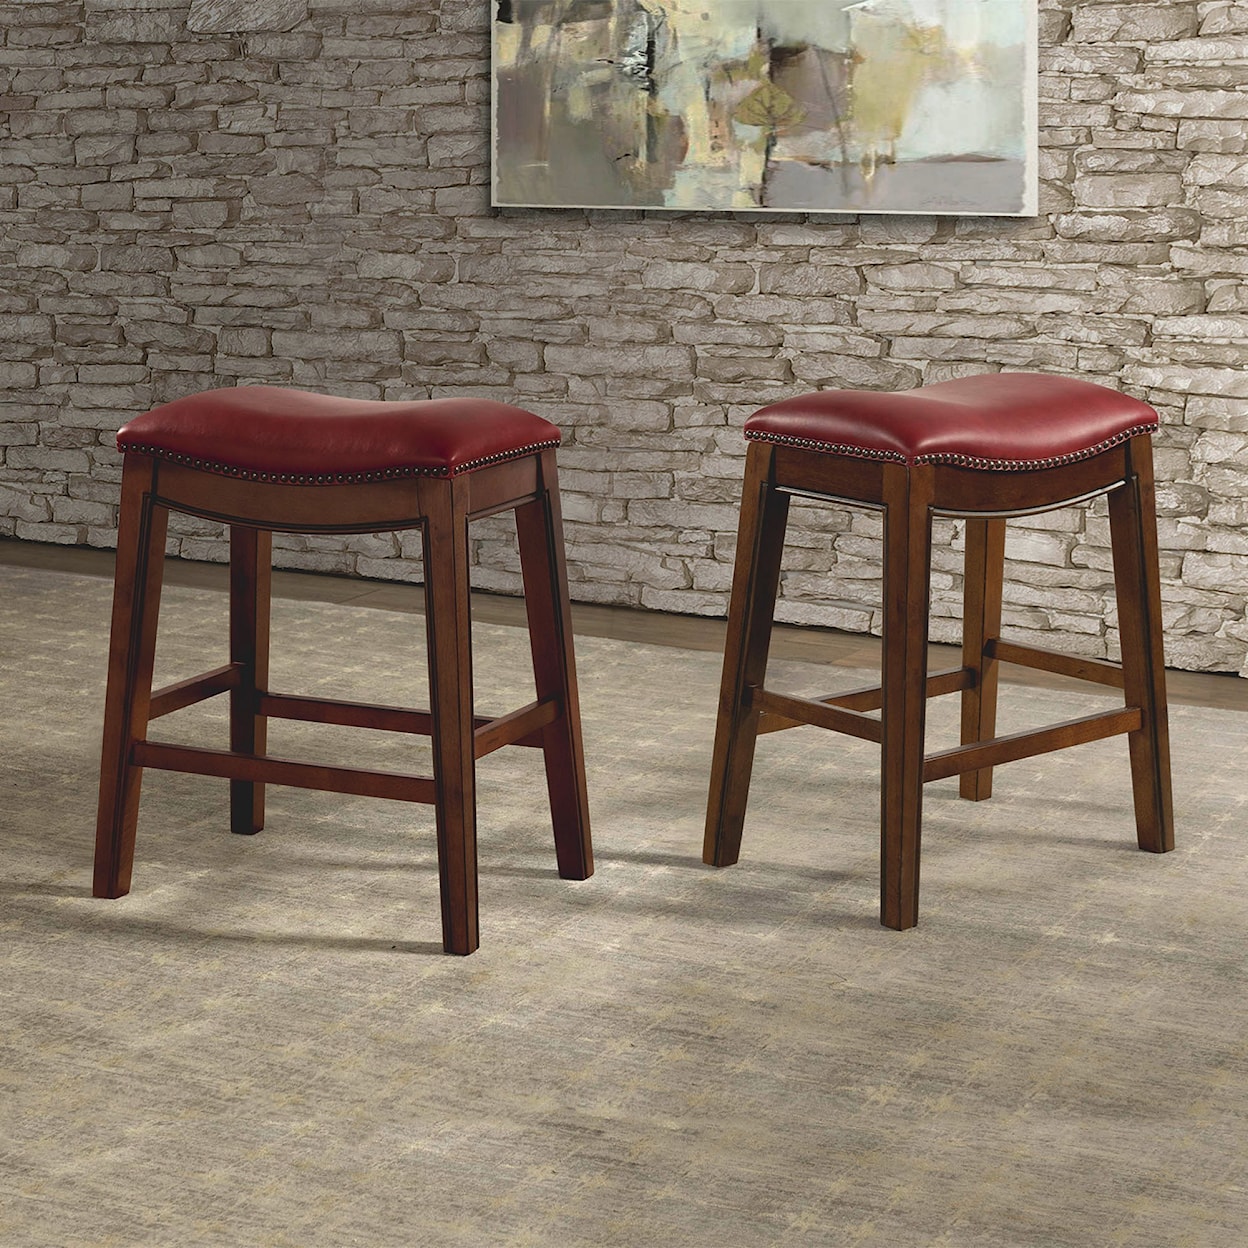 Elements Fiesta 24" Backless Counter Height Stool